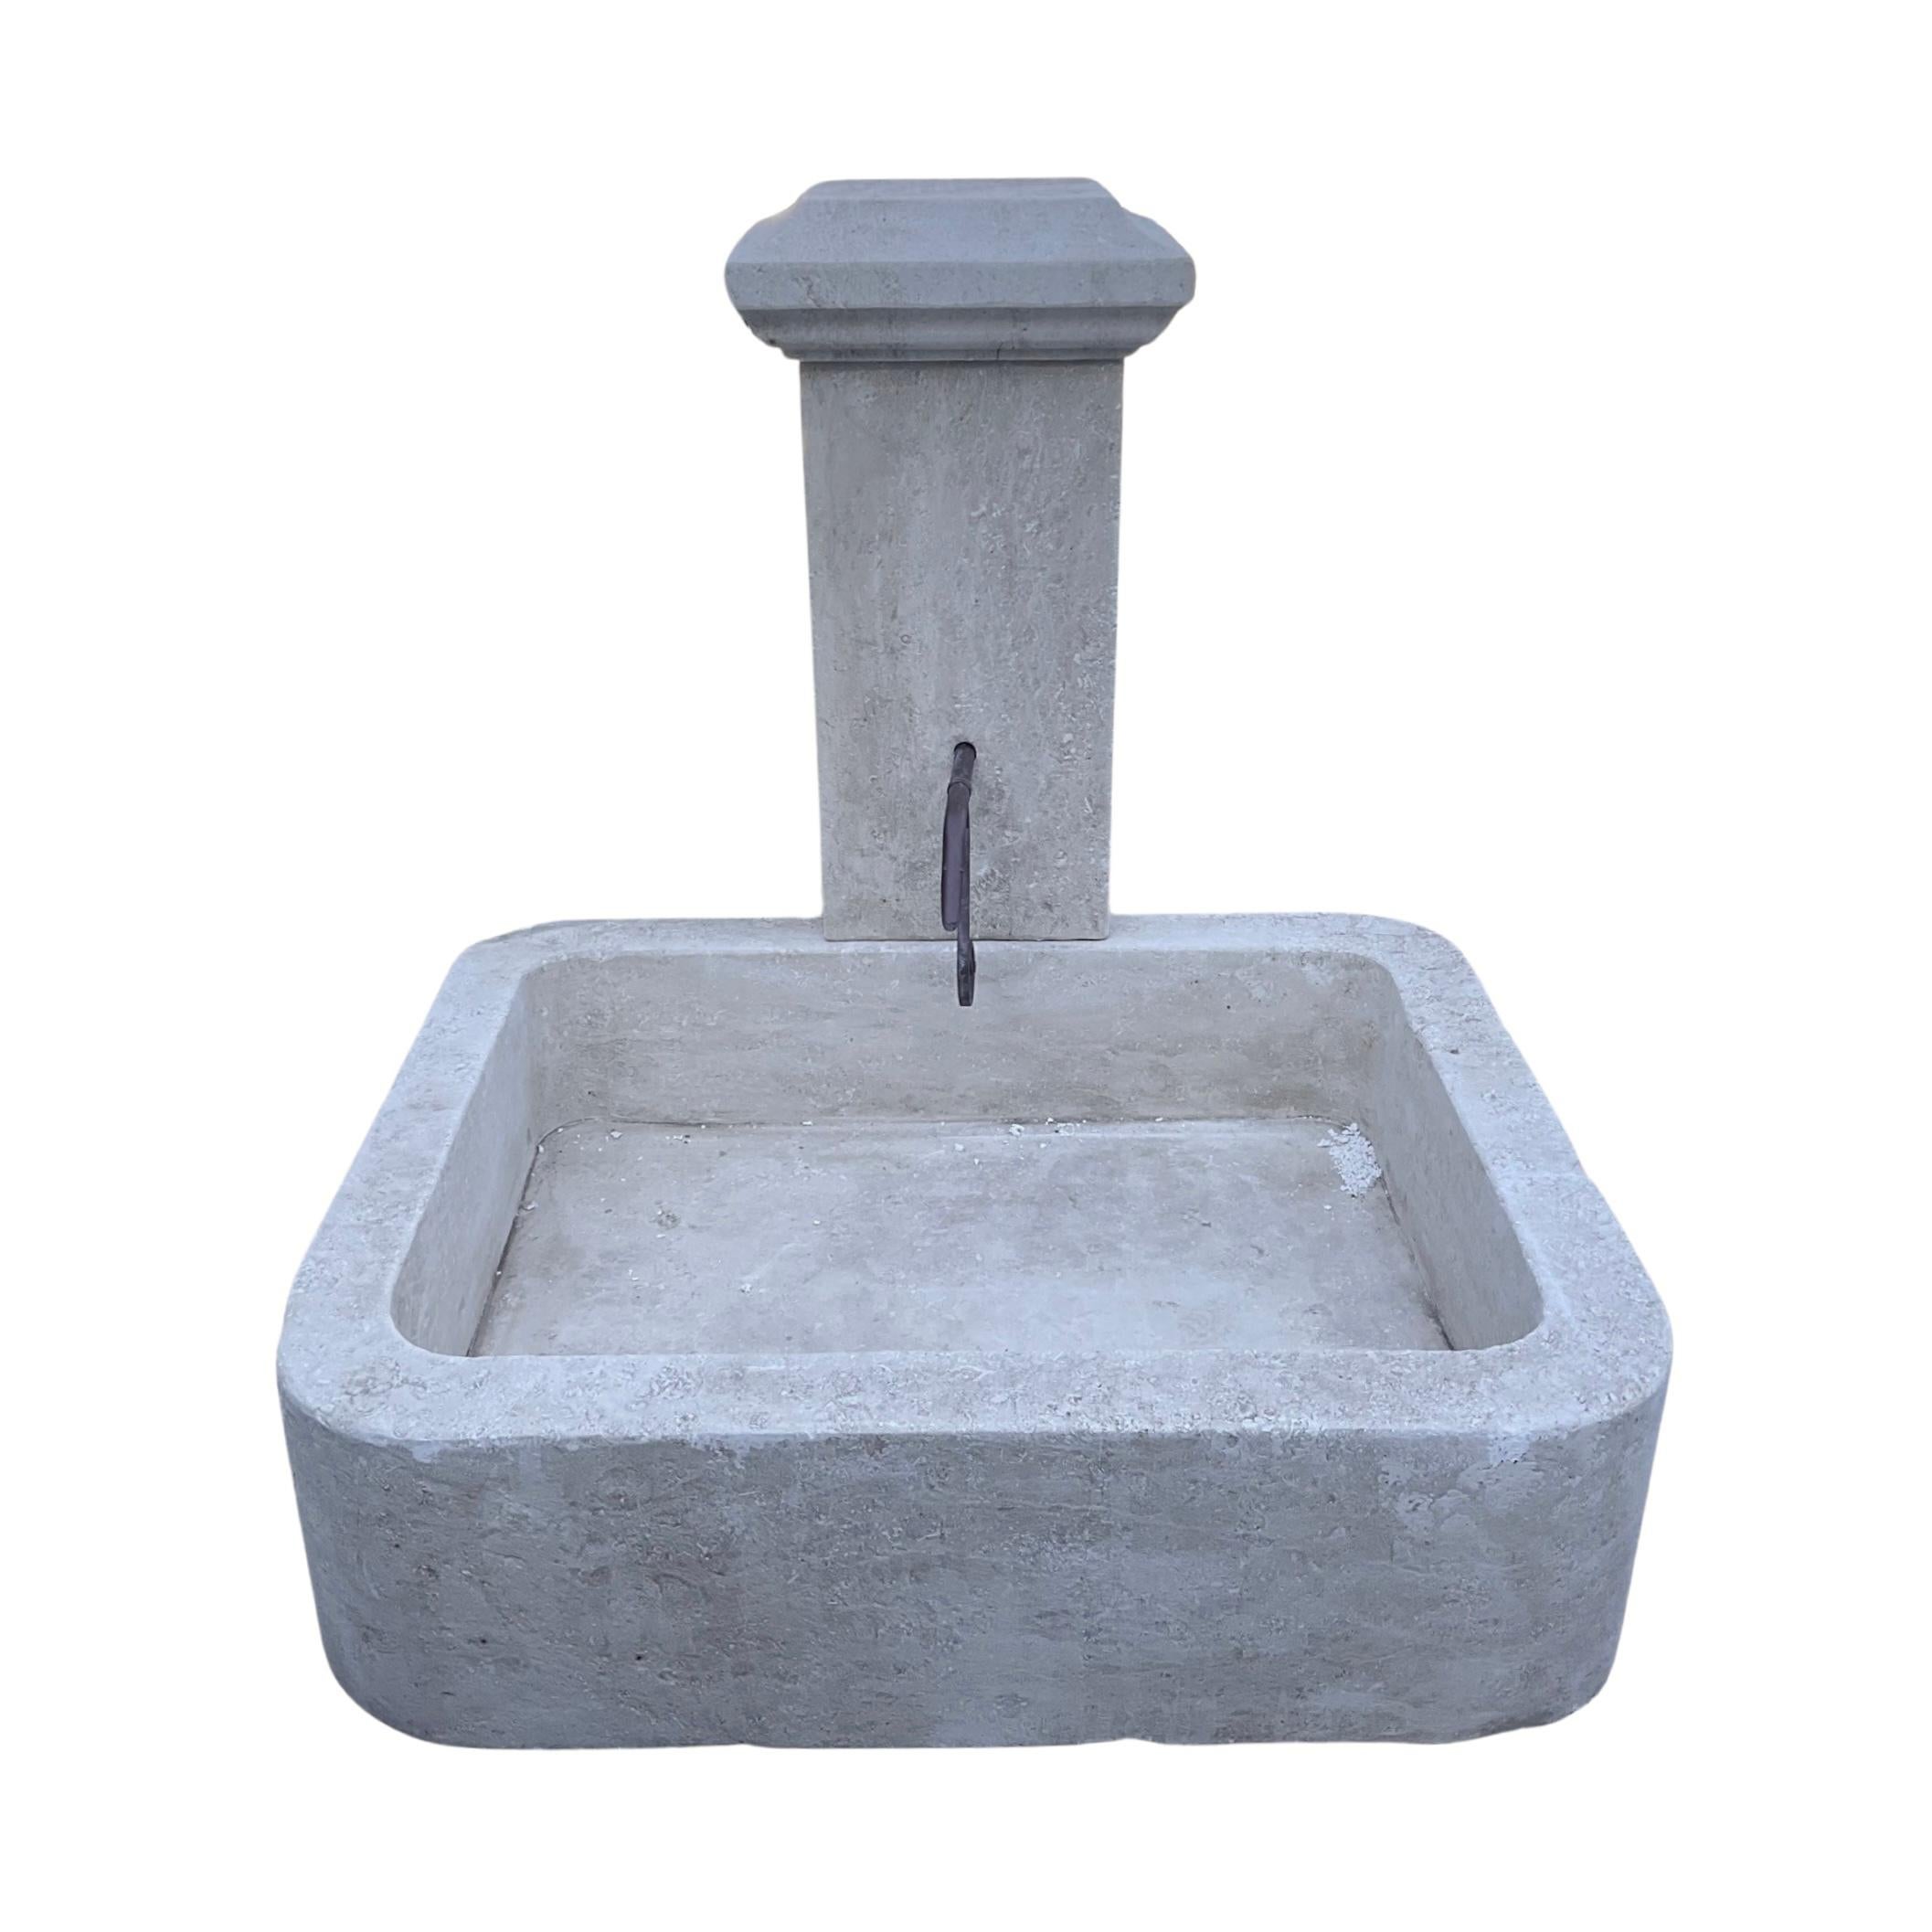 This beautiful French Limestone Fountain combines fine hand-carved artistry and durable construction. Boasting a large size basin in the center and a spout, this newly carved fountain is perfect for creating a tranquil outdoor escape. 